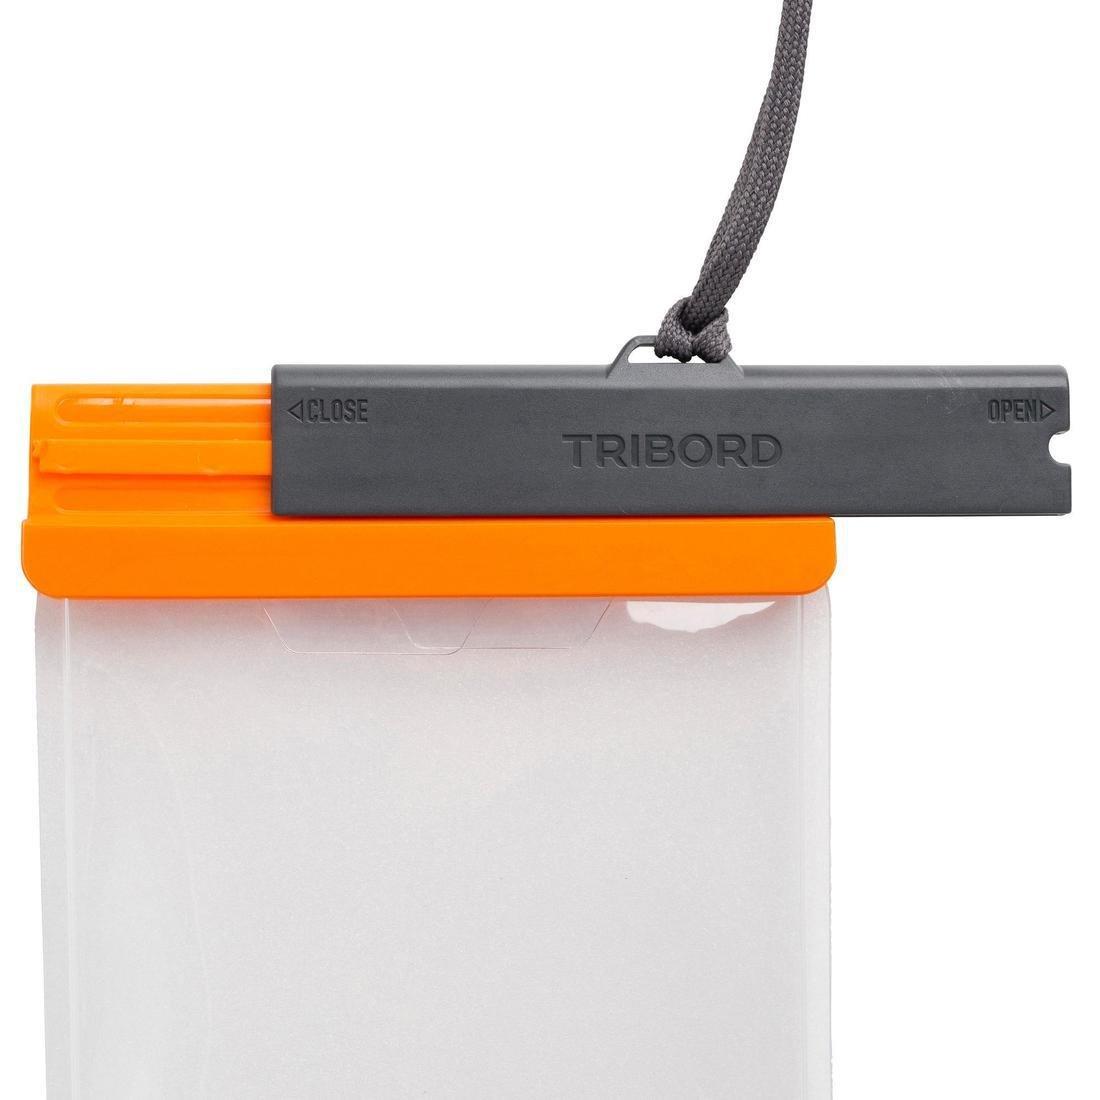 ITIWIT - Waterproof Phone Pouch, Colorless